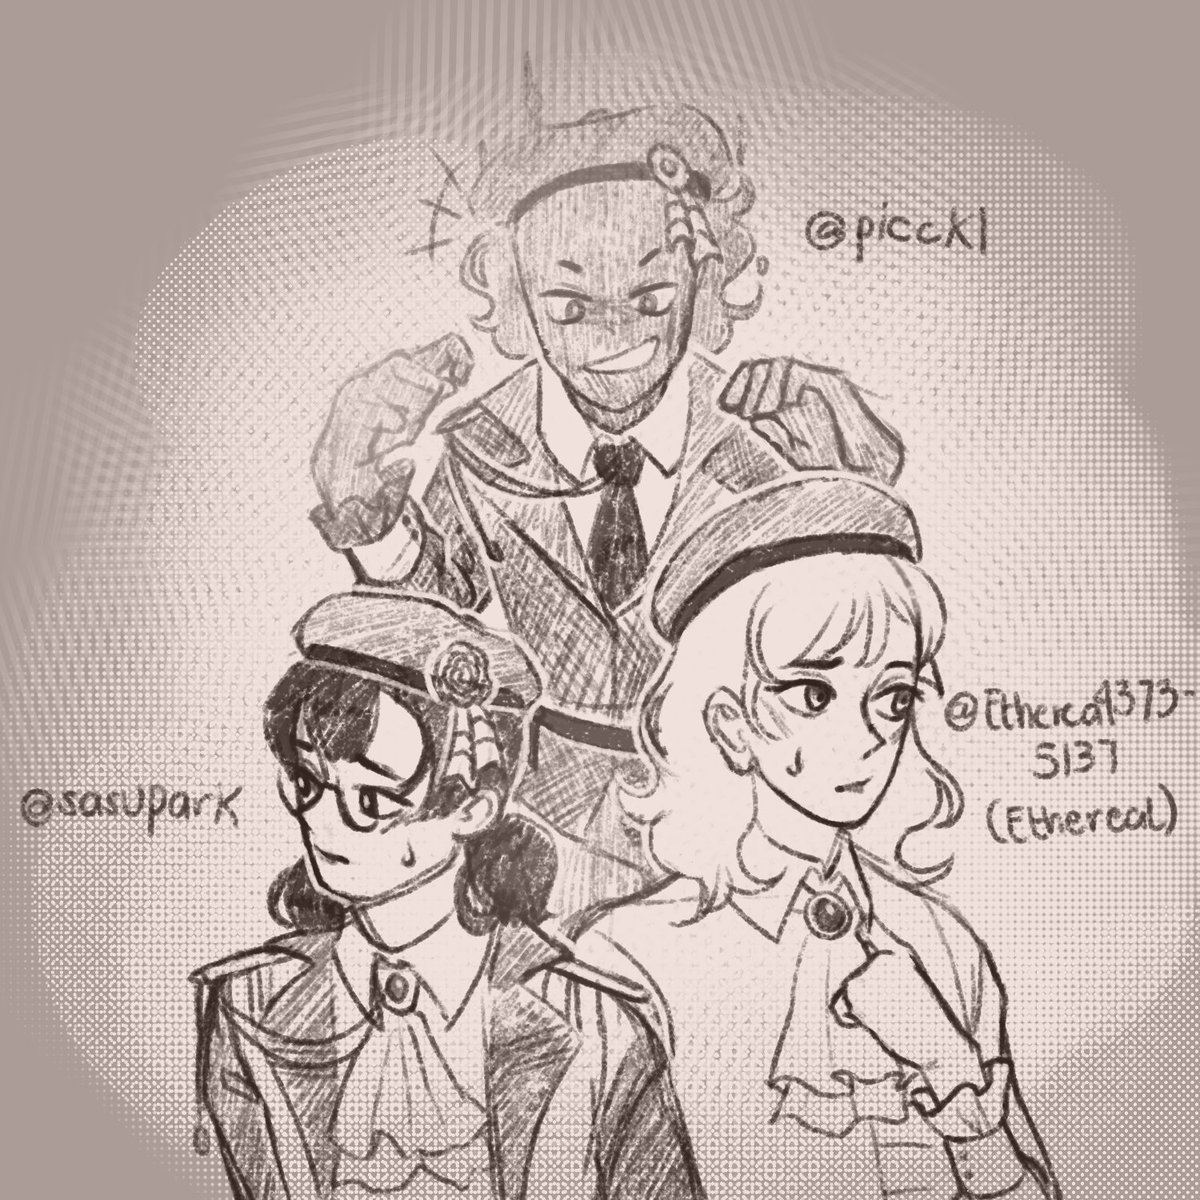 Heres my fave benchtwt acad. moot interaction doodles from today ^^
(rts ok!)

#benchtwtacademy 